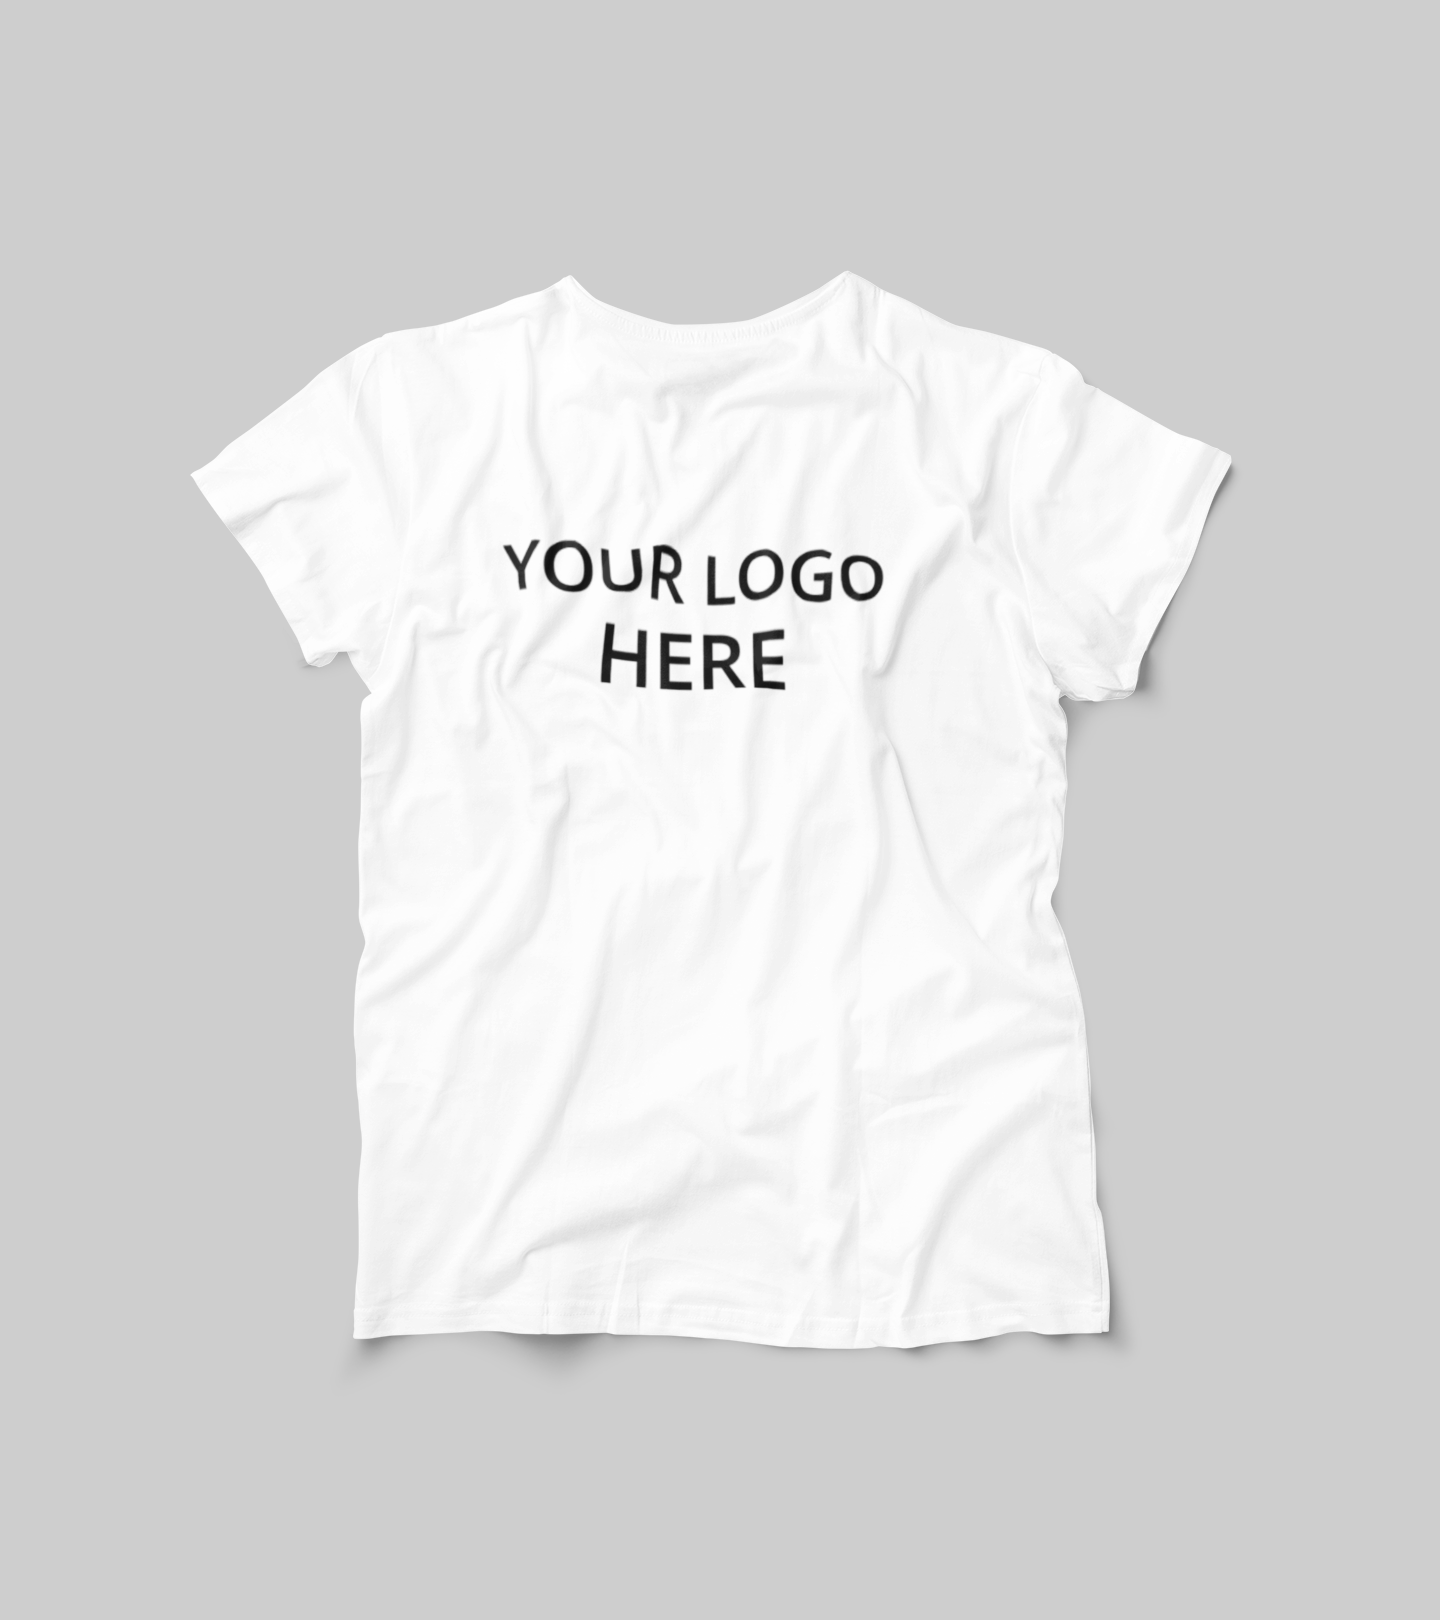 Women's Custom T-shirts | With Your Logo